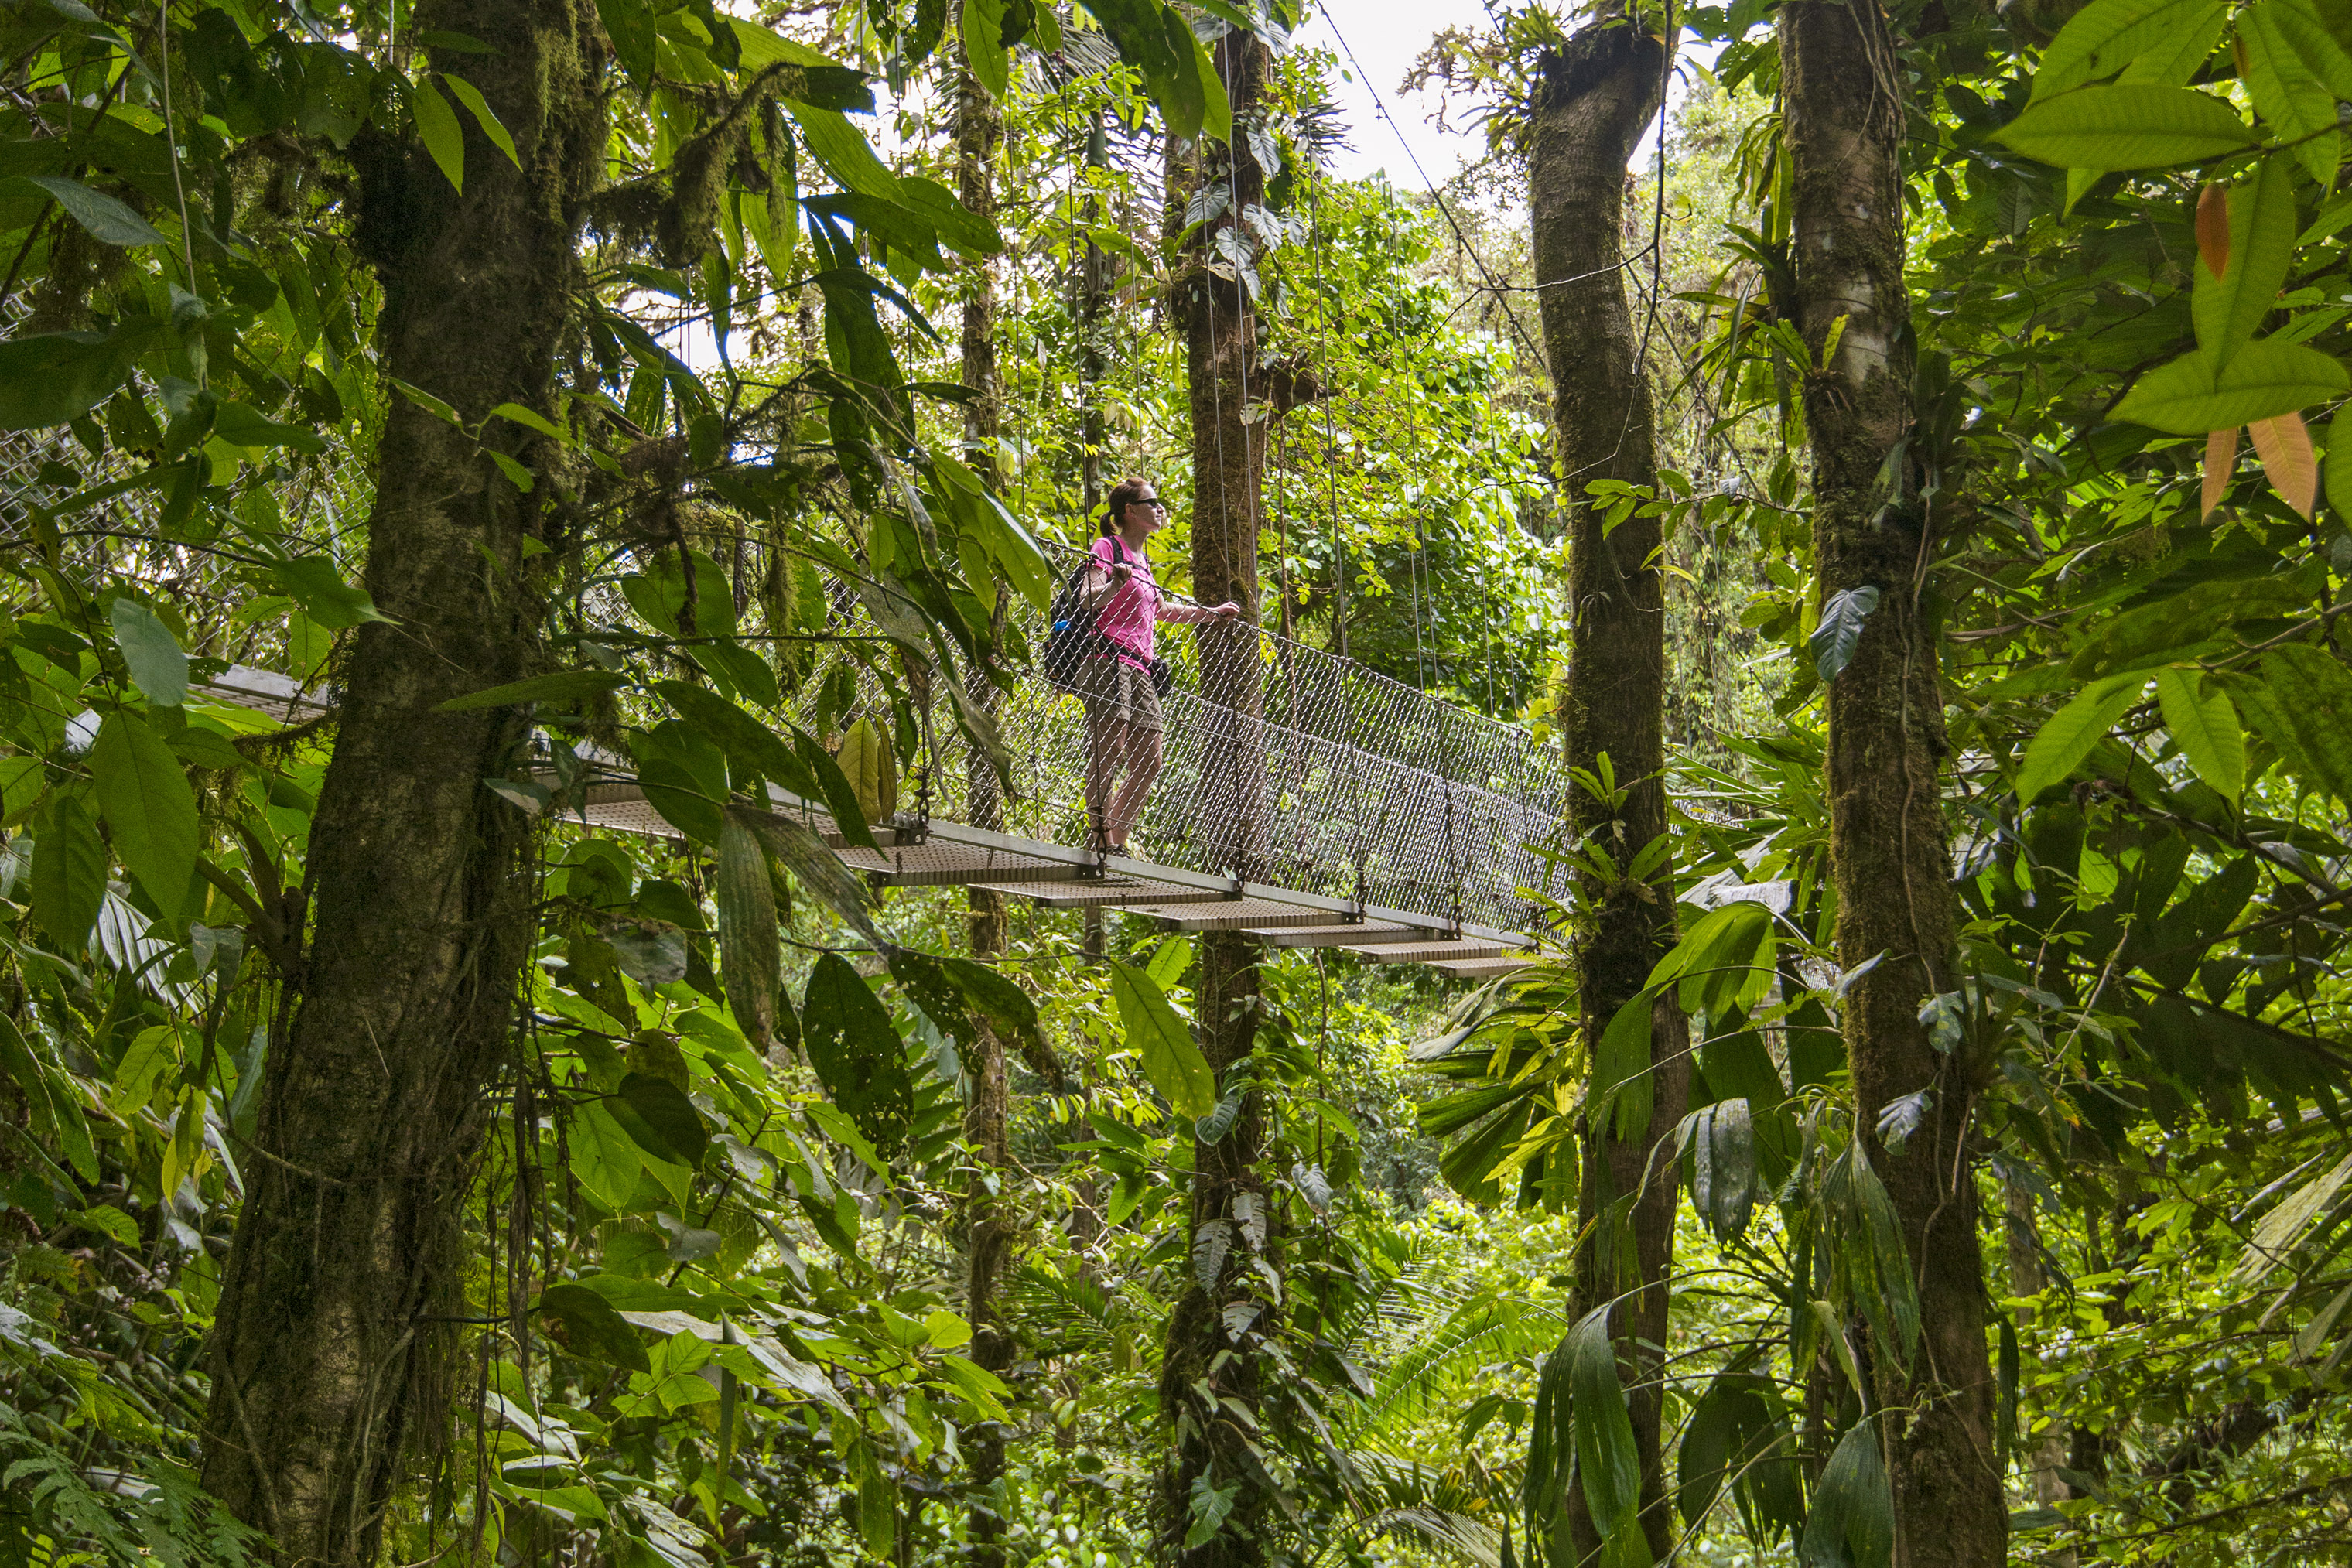 The Monteverde Cloud Forest Reserve gives visitors an up-close view of the regionâ€™s vast biodiversity.